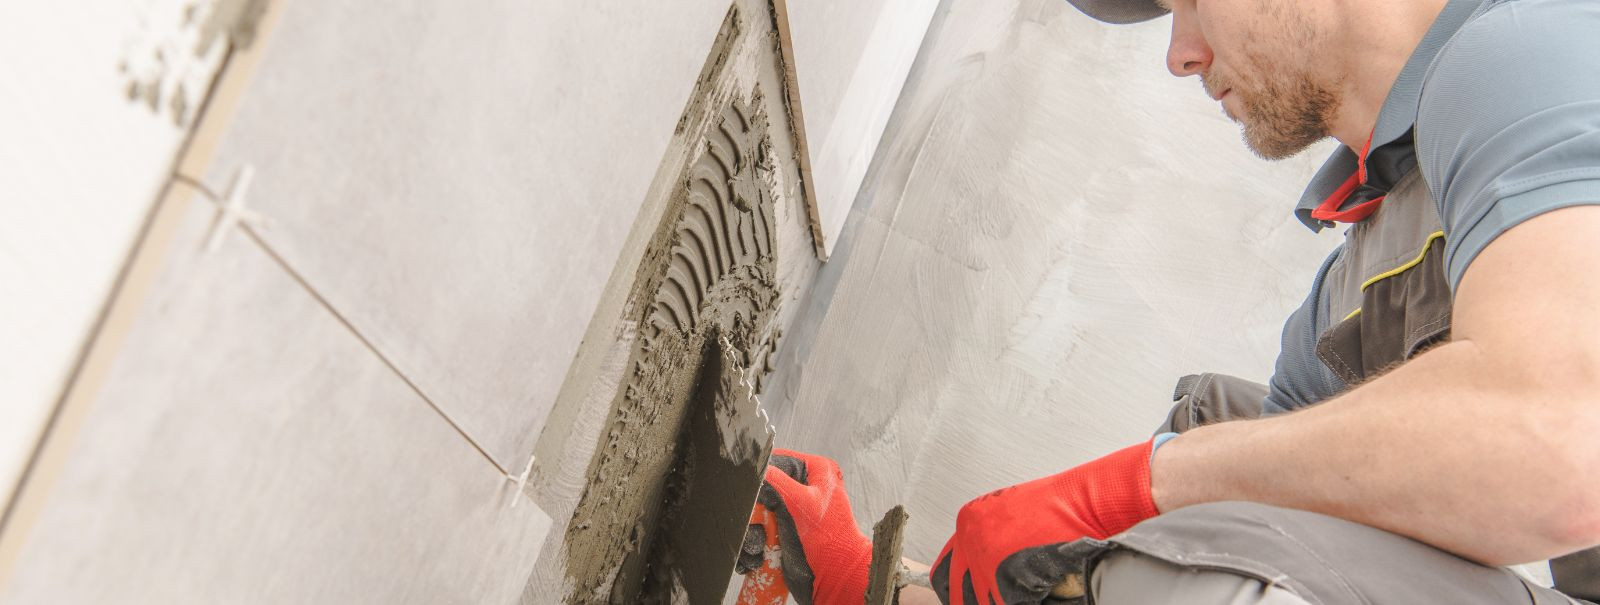 Eco-friendly plastering refers to the use of sustainable materials and practices in the plastering process, aiming to reduce the environmental footprint of cons